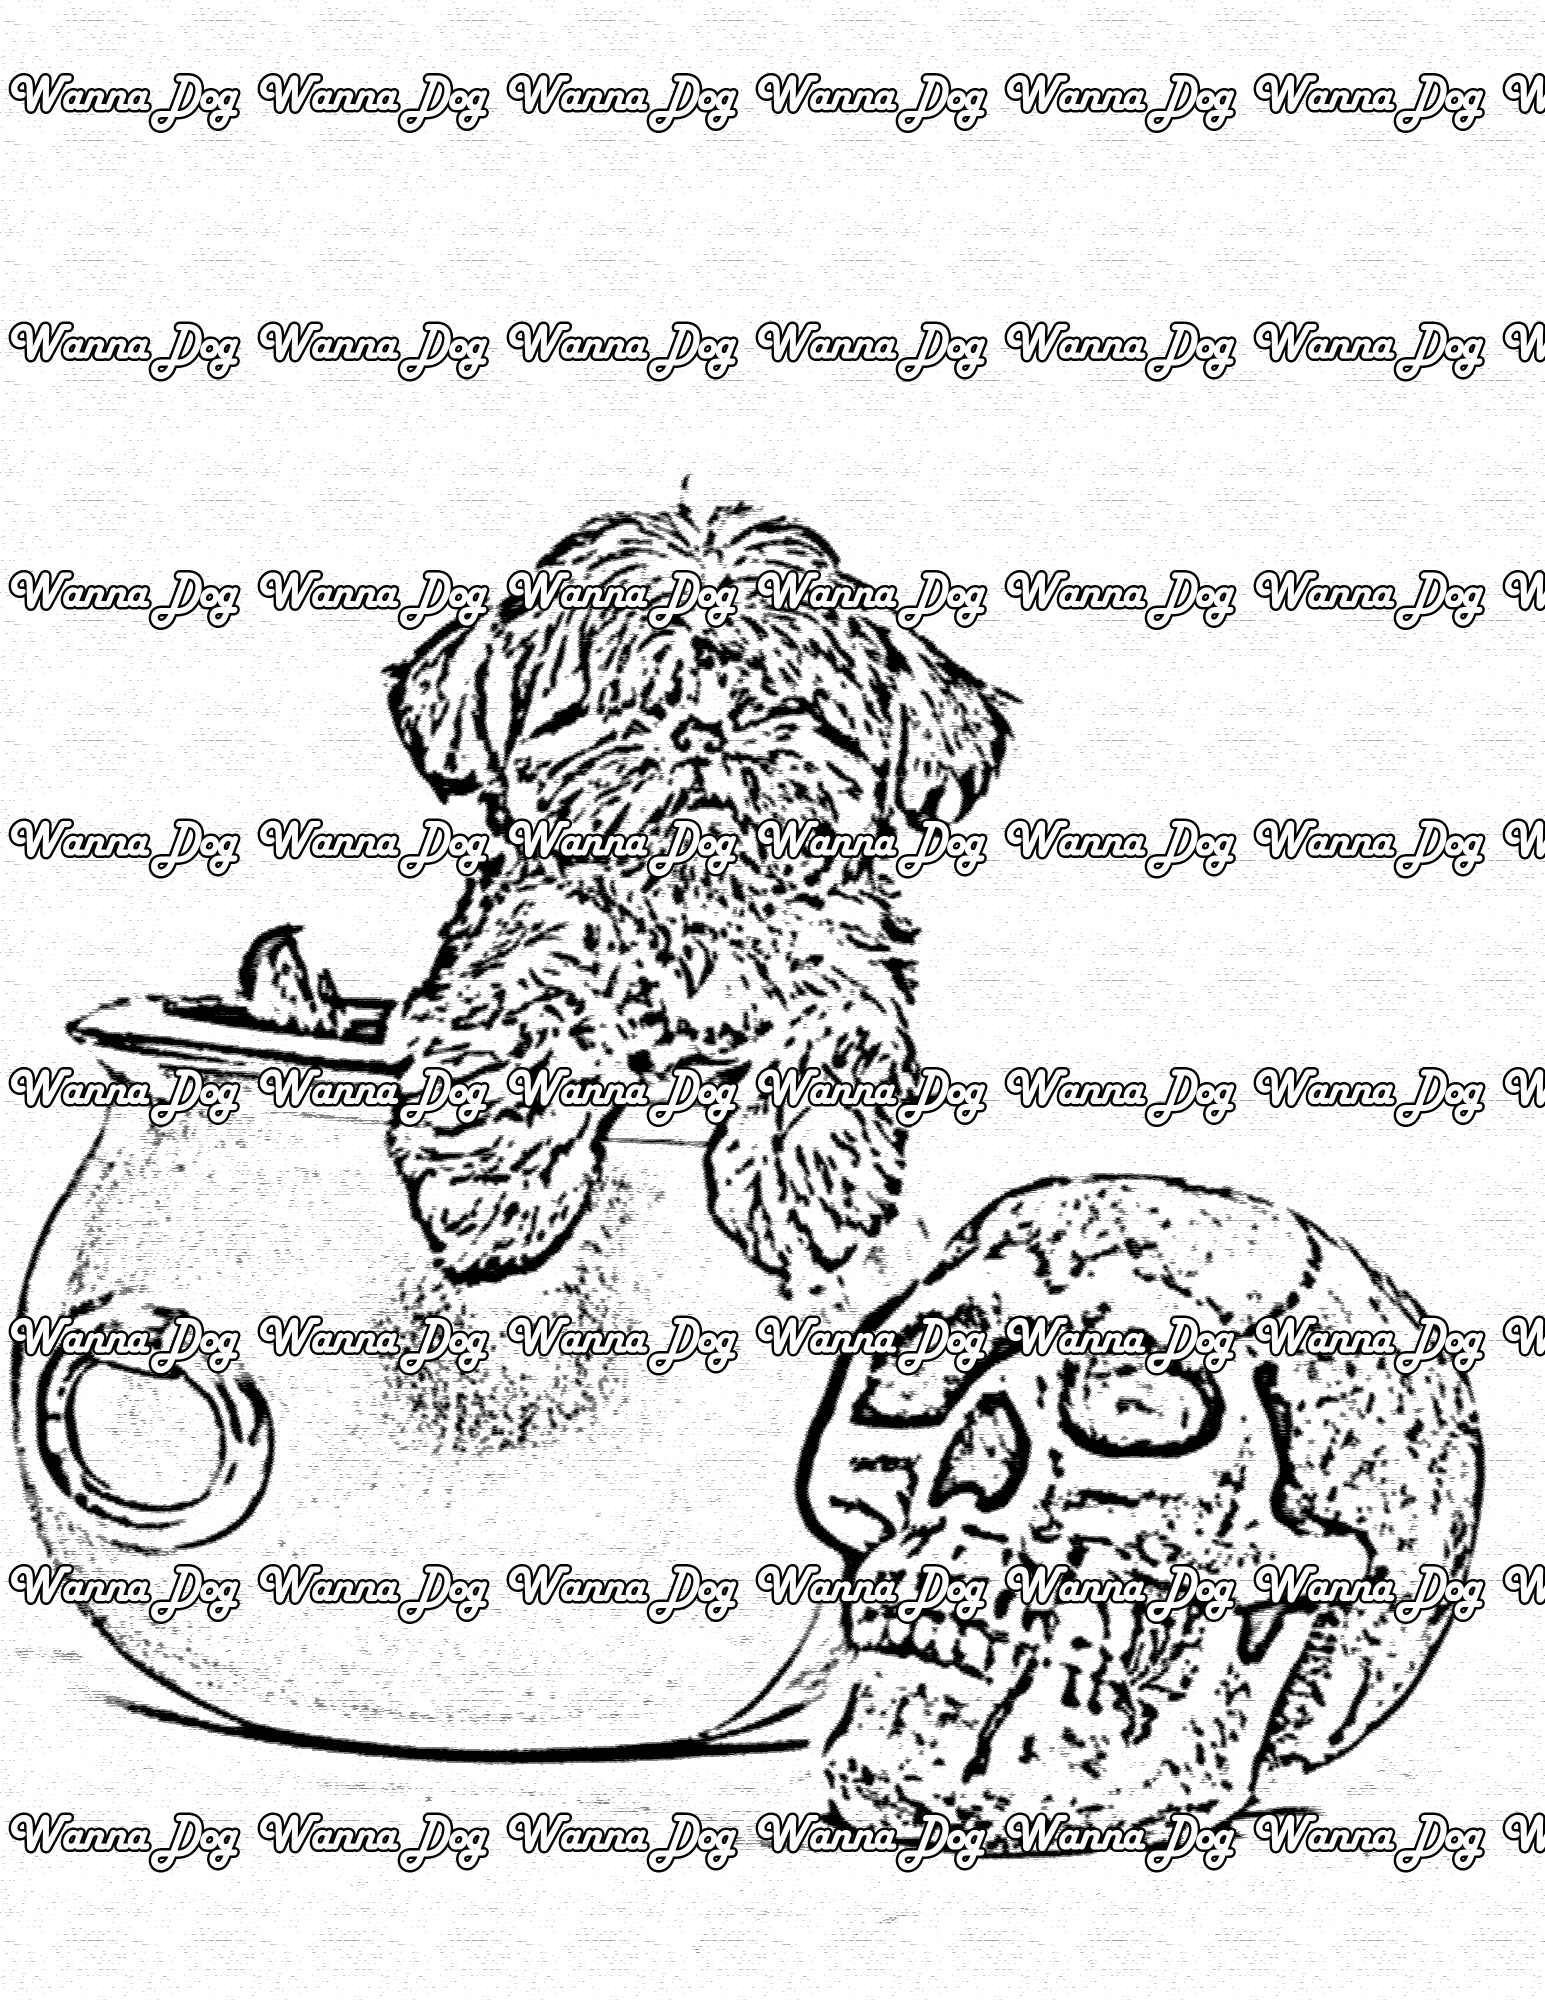 Shih Tzu Coloring Page of a Shih Tzu with Halloween decorations